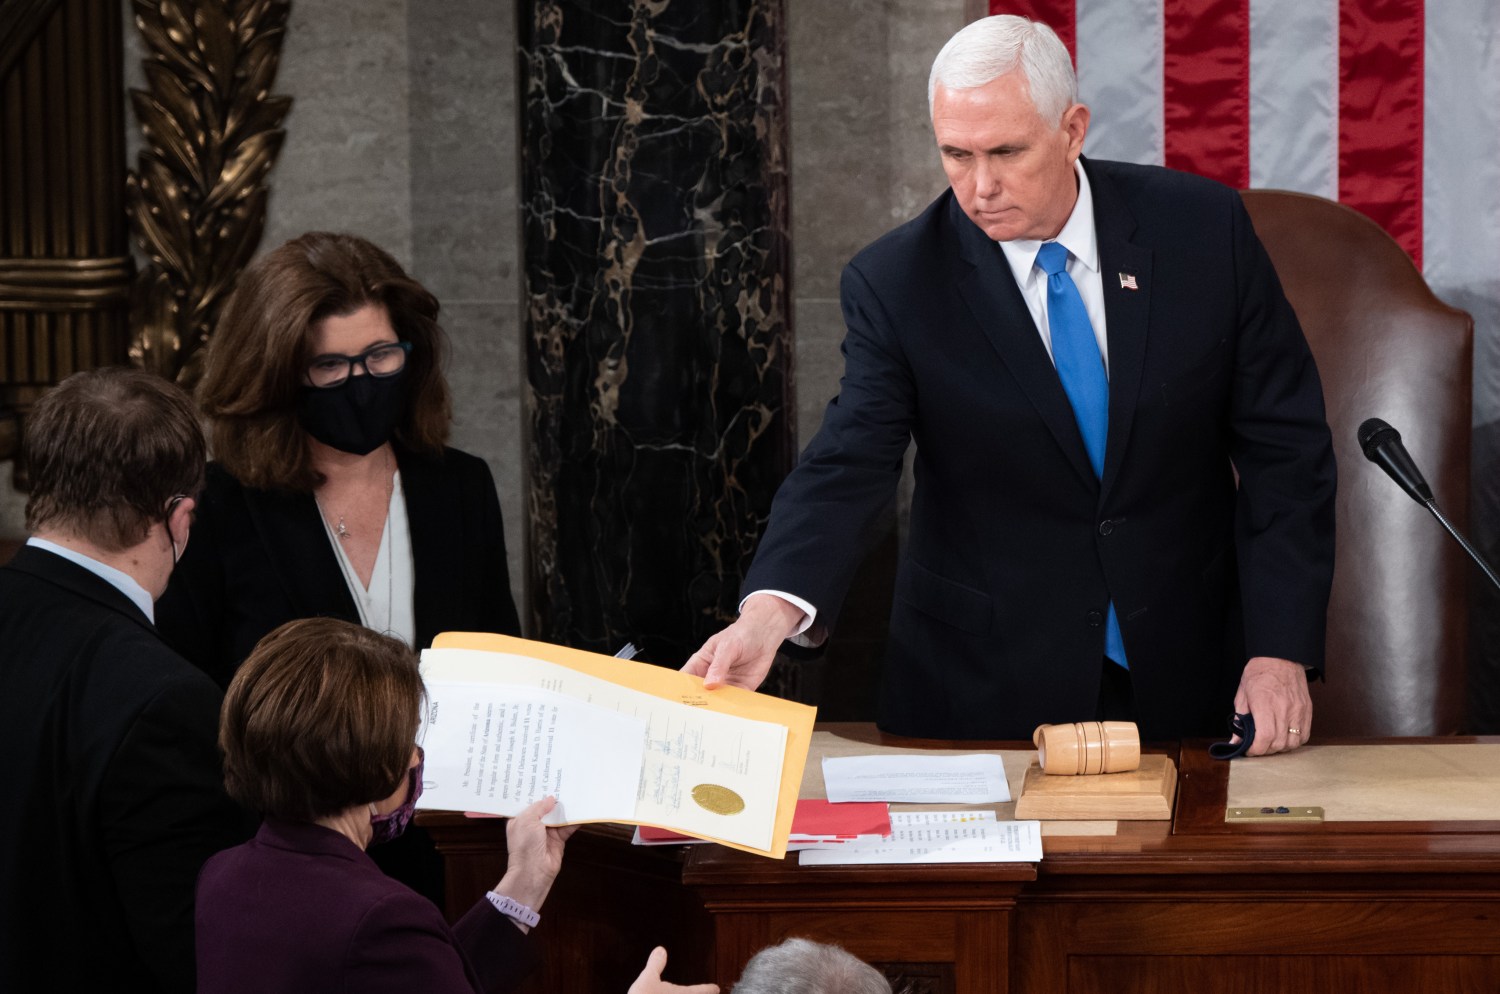 US Vice President Mike Pence hands the electoral certificate from the state of Arizona to US Senator Amy Klobuchar, Democrat of Minnesota, as he presides over a joint session of Congress to count the electoral votes for President at the US Capitol in Washington, DC, January 6, 2021. (Photo by Pool/Sipa USA)No Use UK. No Use Germany.